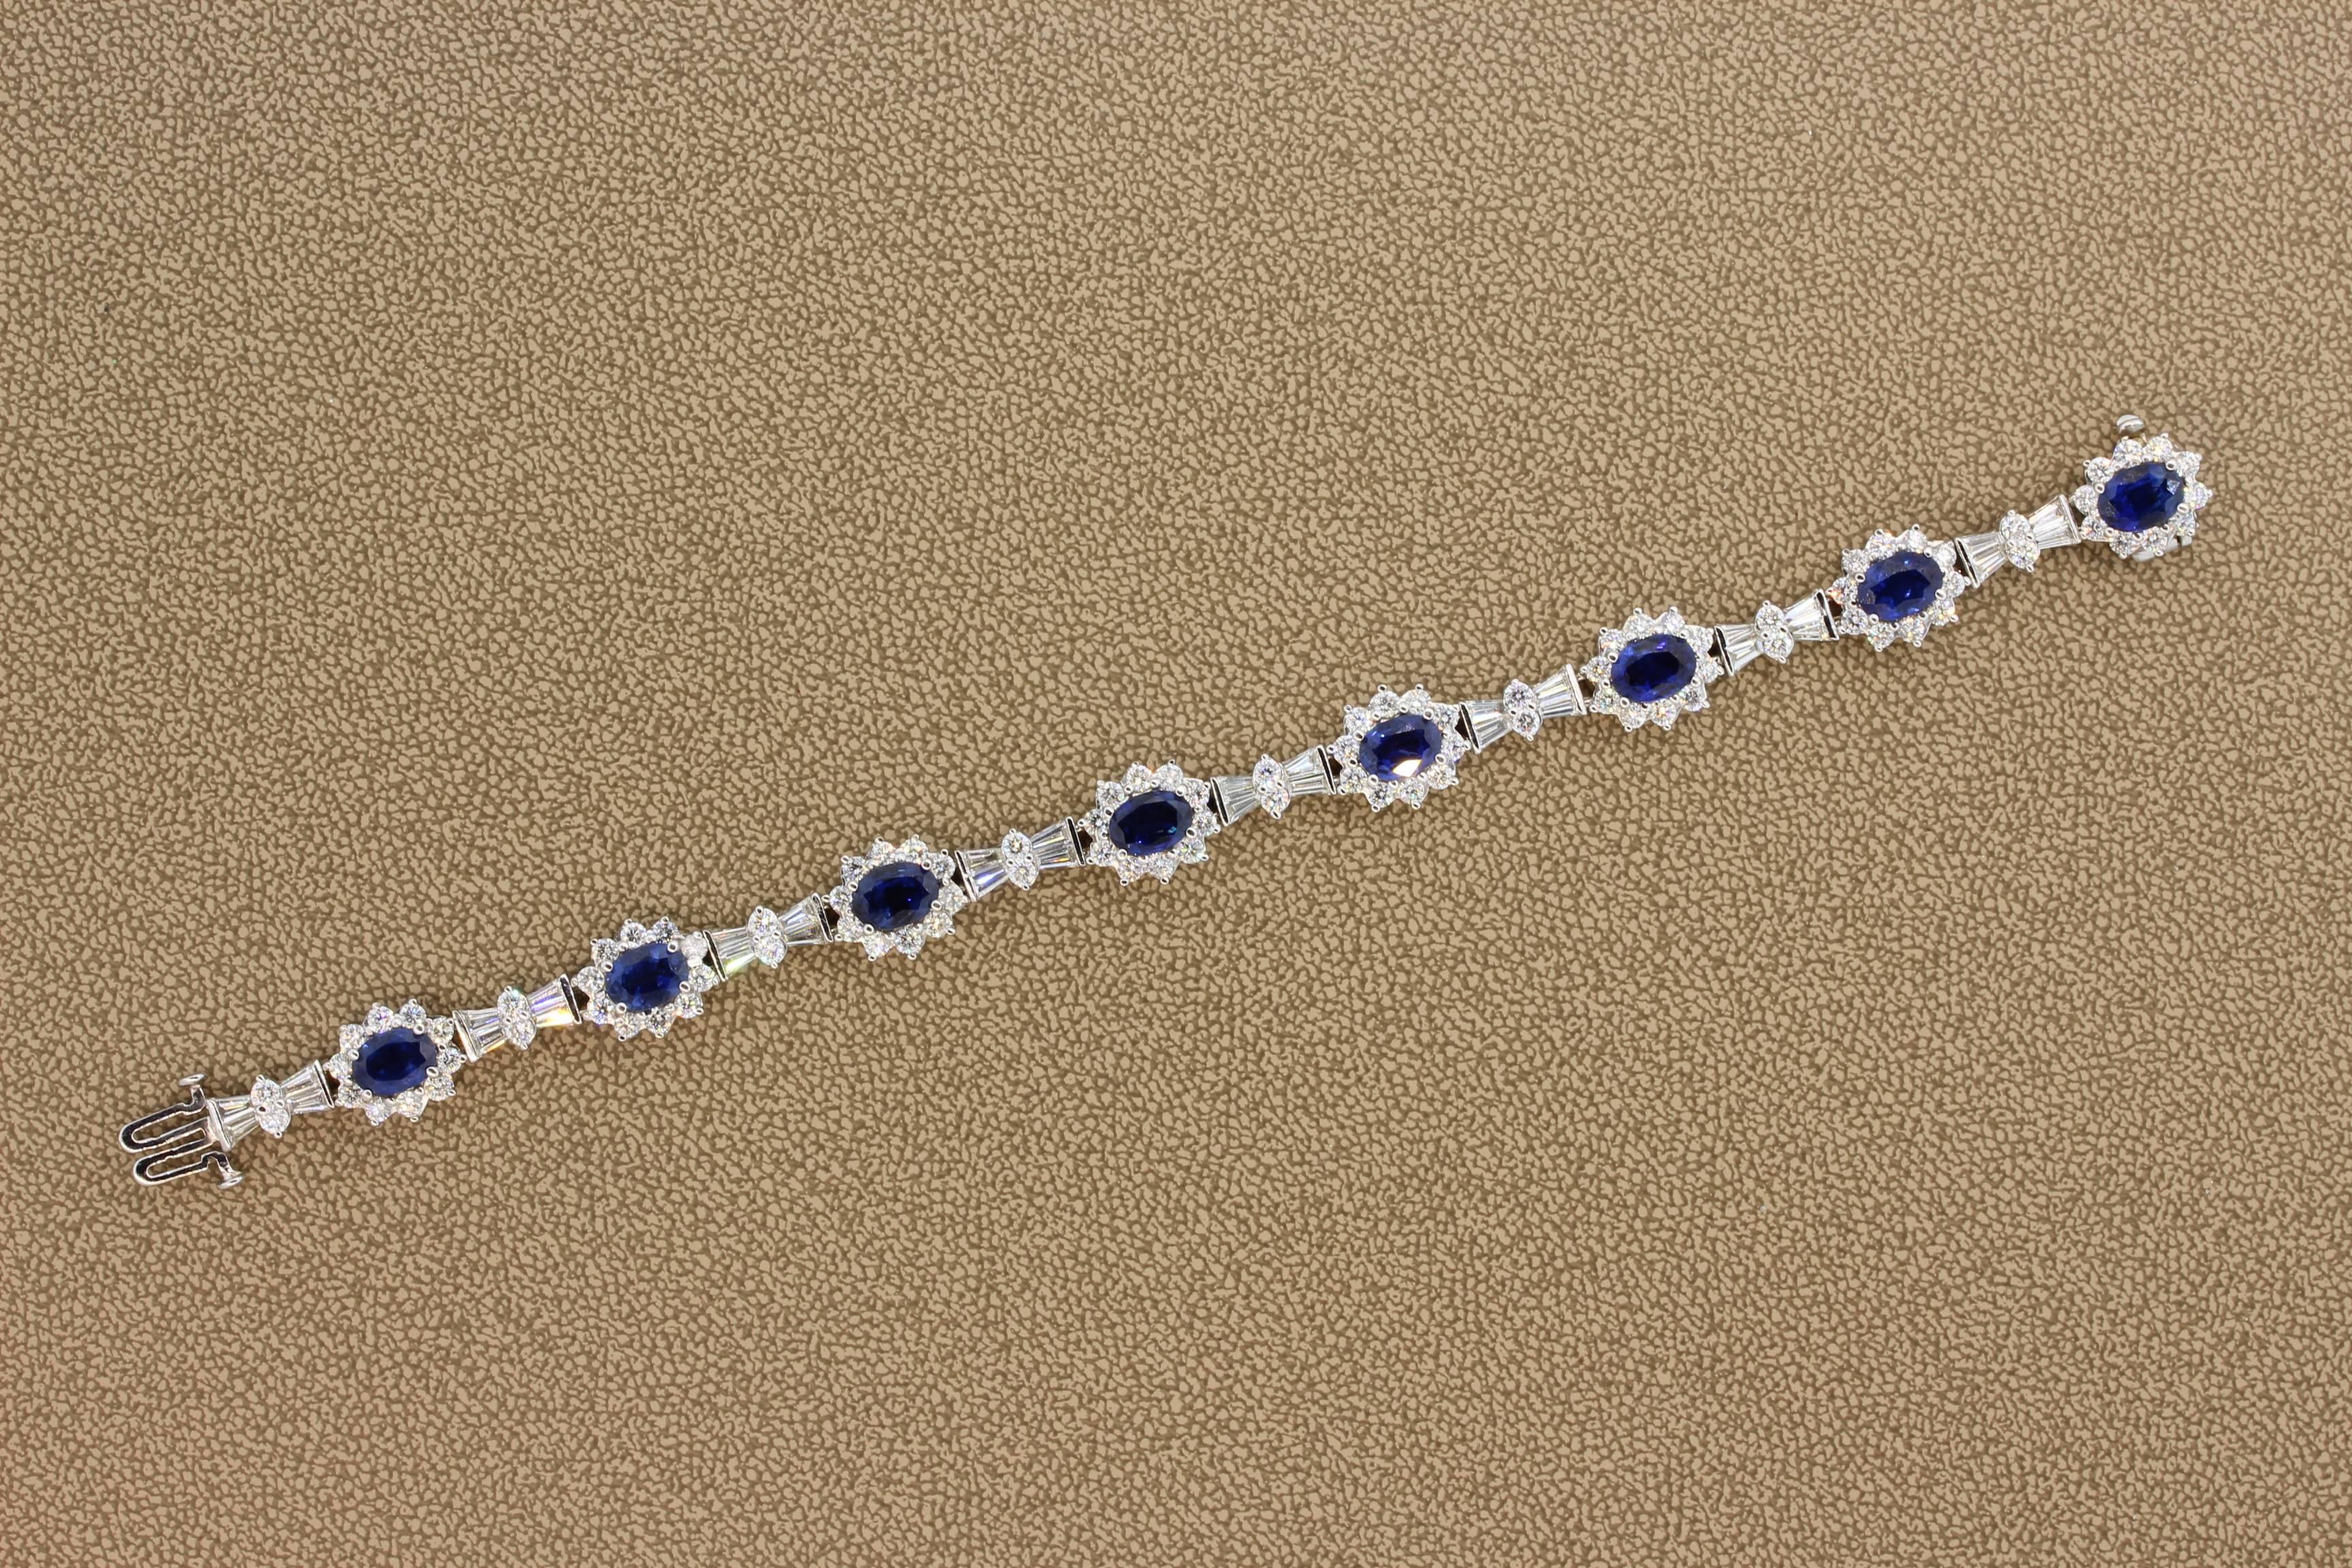 A luxurious piece of fine jewelry. This bracelet features 8 blue sapphires with deep color weighting a total of 9.90 carats. There are 5.38 carats of VS quality diamonds filling the rest of the bracelet elevating its look and feel.

Length: 7 inches
